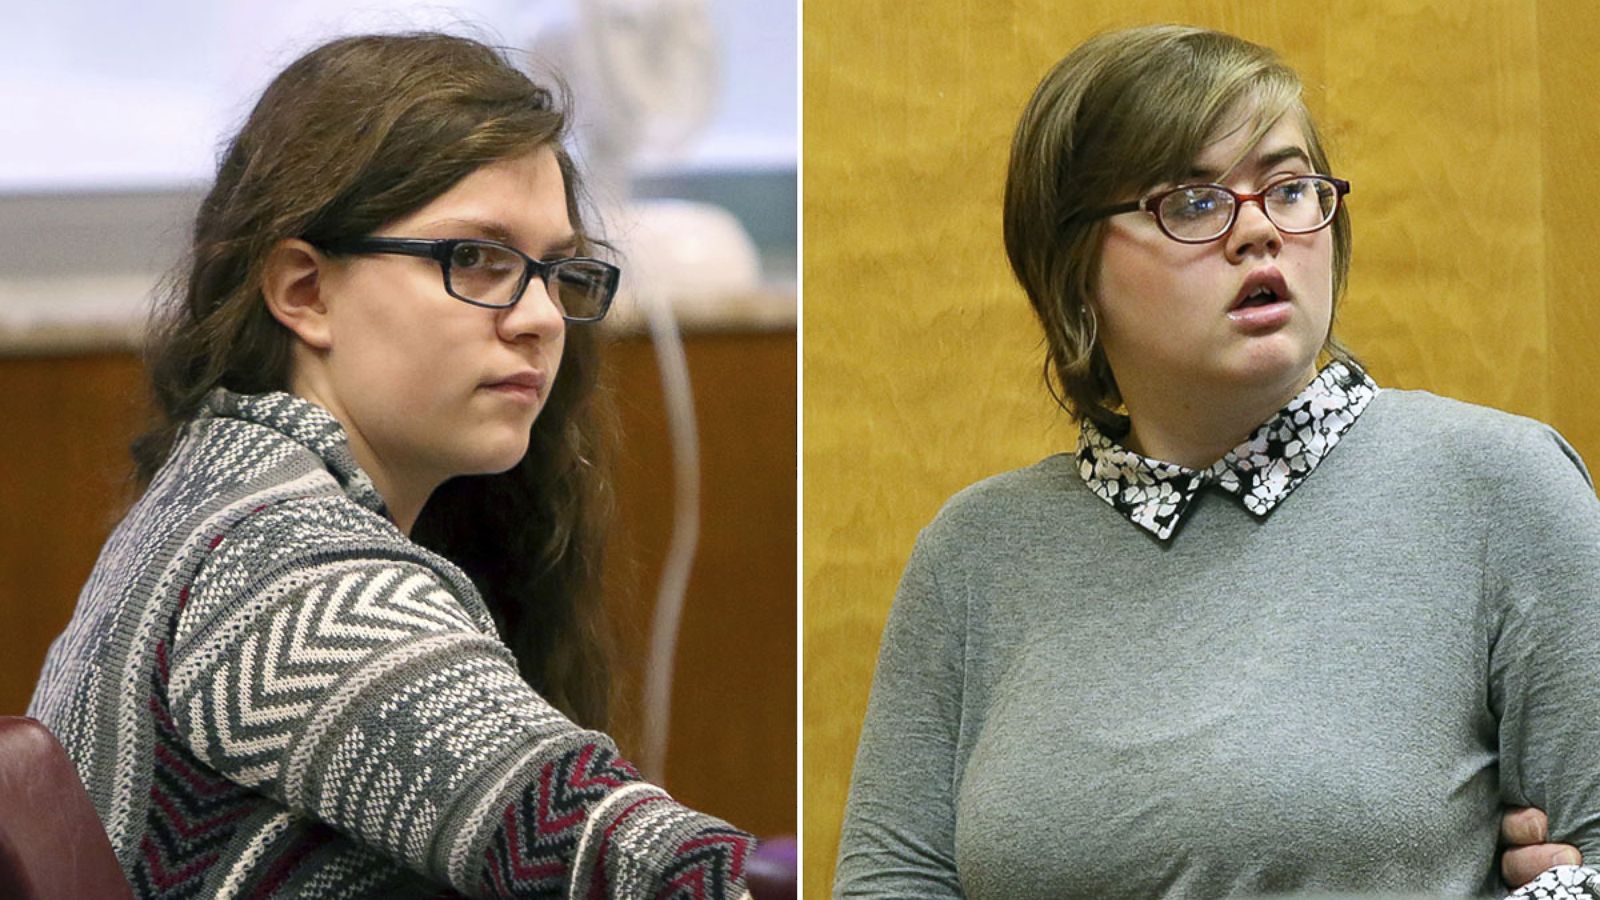 Mothers Of Teens Who Pleaded Guilty In Slender Man Stabbing Case - slender girl slender copy and paste roblox avatar